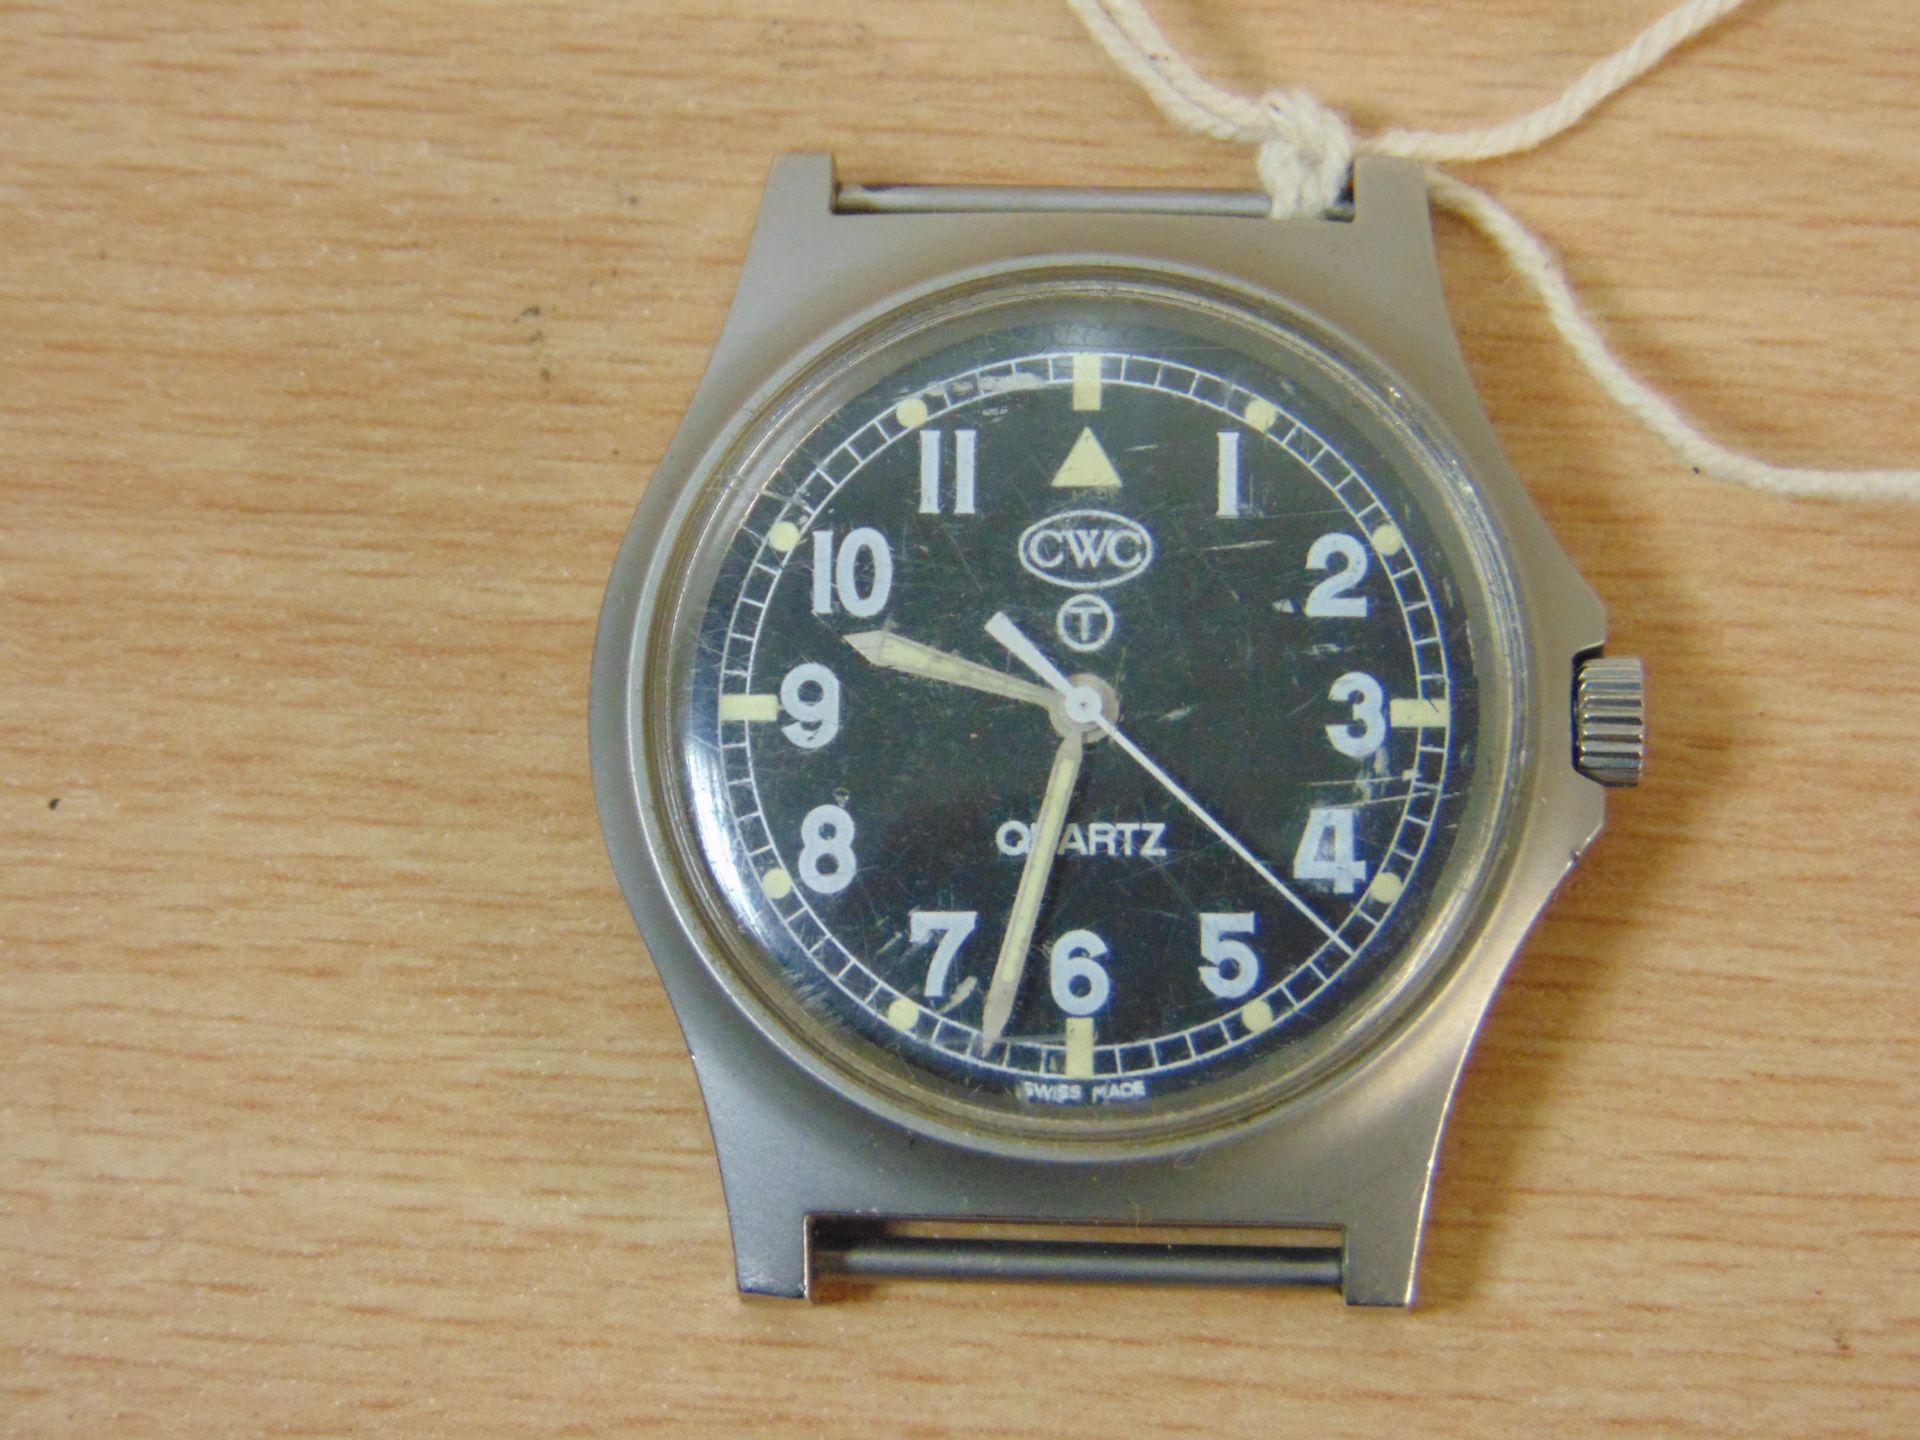 CWC W10 SERVICE WATCH NATO MARKED DATED 1998